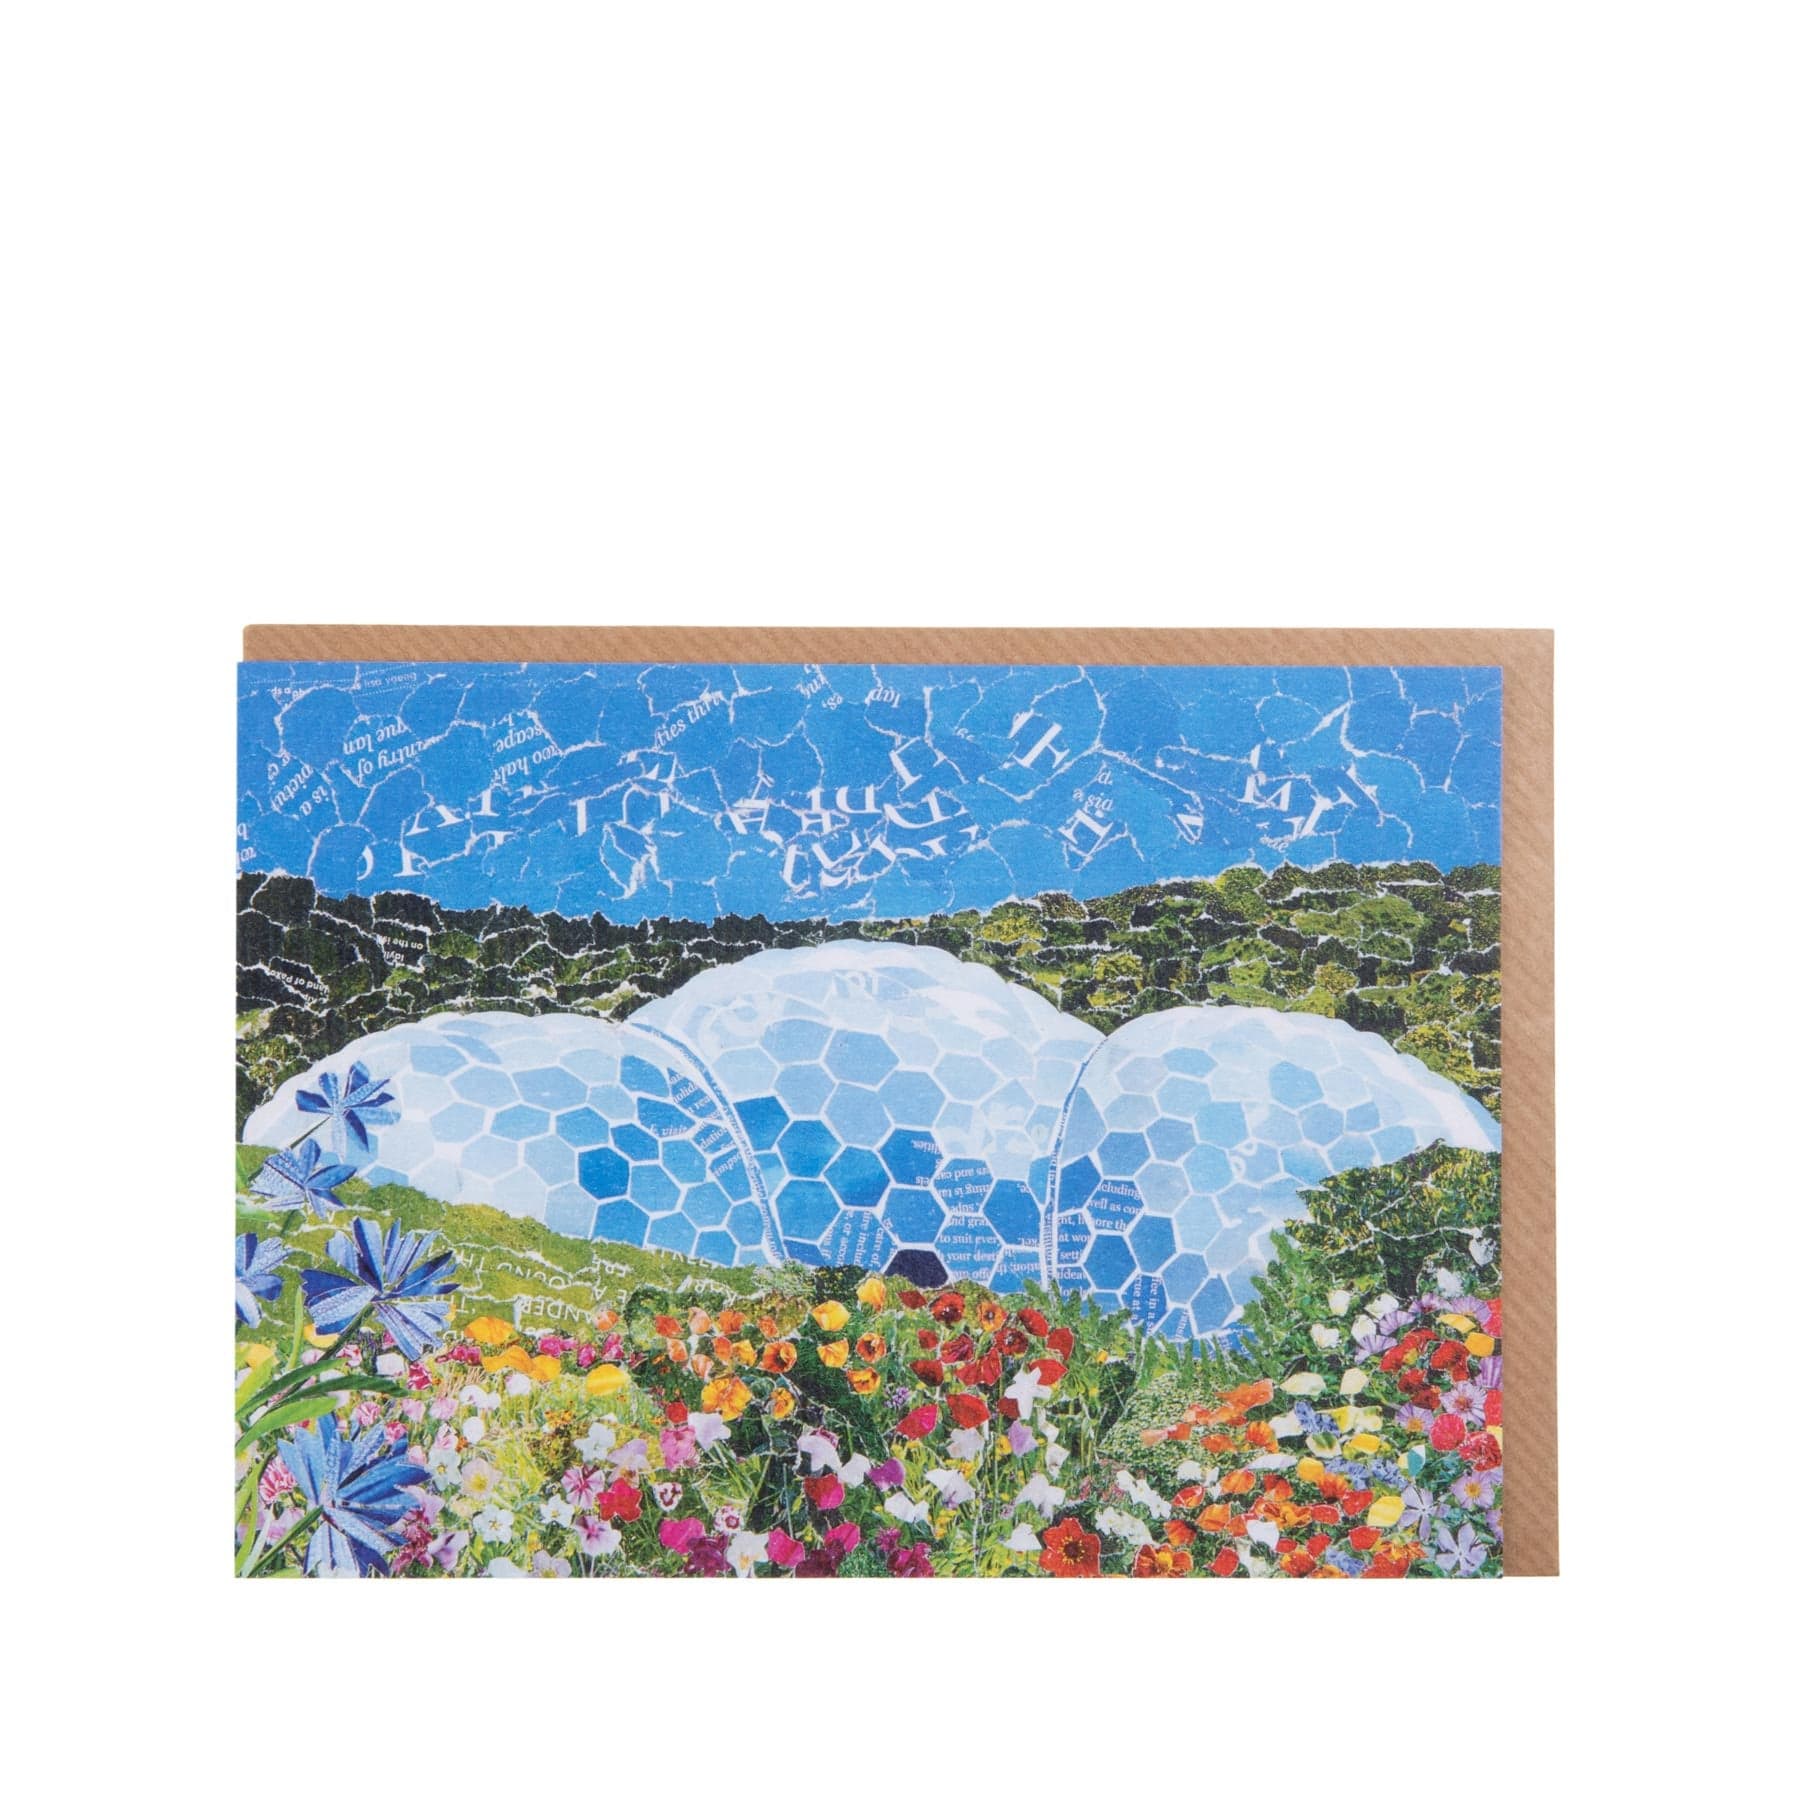 Eden Project floral biome card